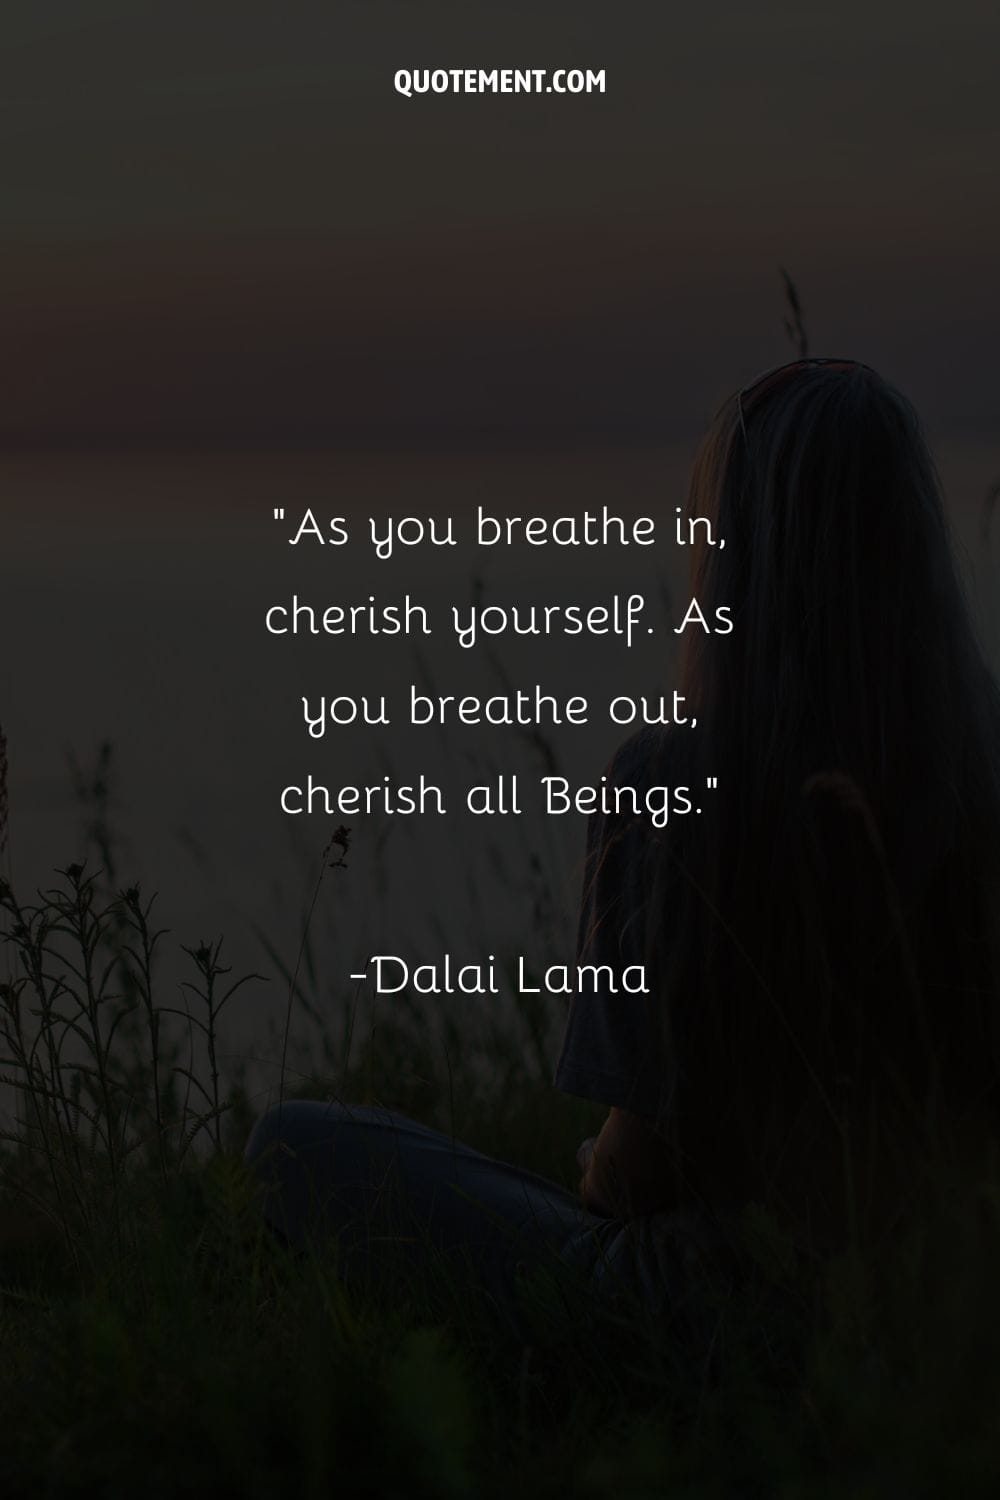 Image of a girl in contemplation representing the best breathe in quote.